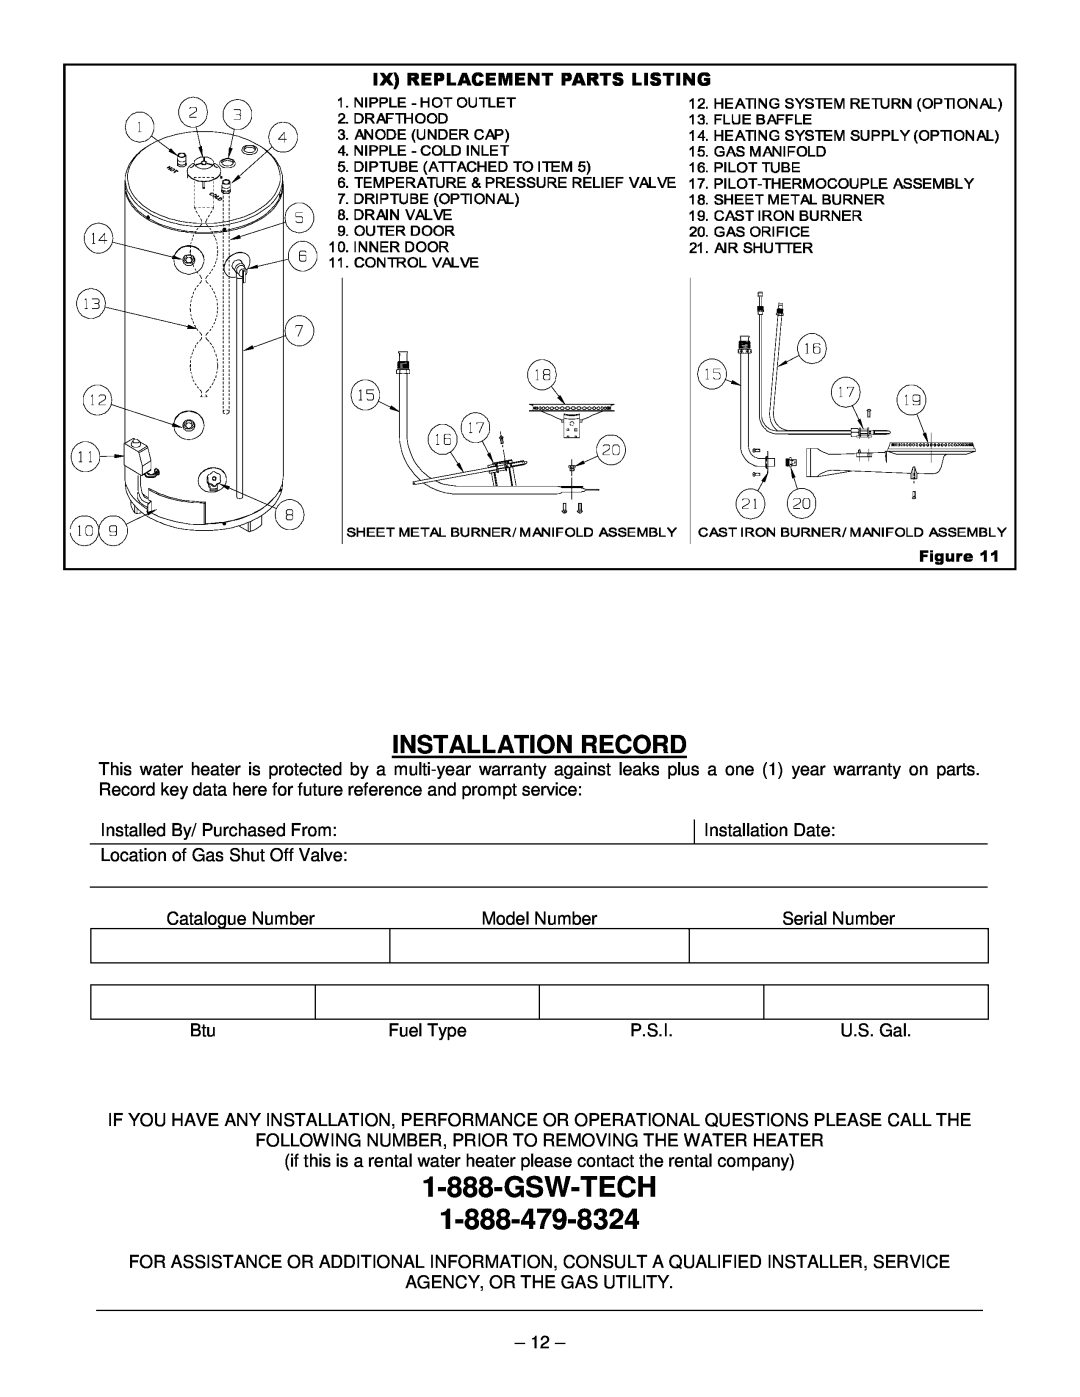 GSW Gas Fired Water Heater warranty Installation Record, Ix Replacement Parts Listing, Gsw-Tech 